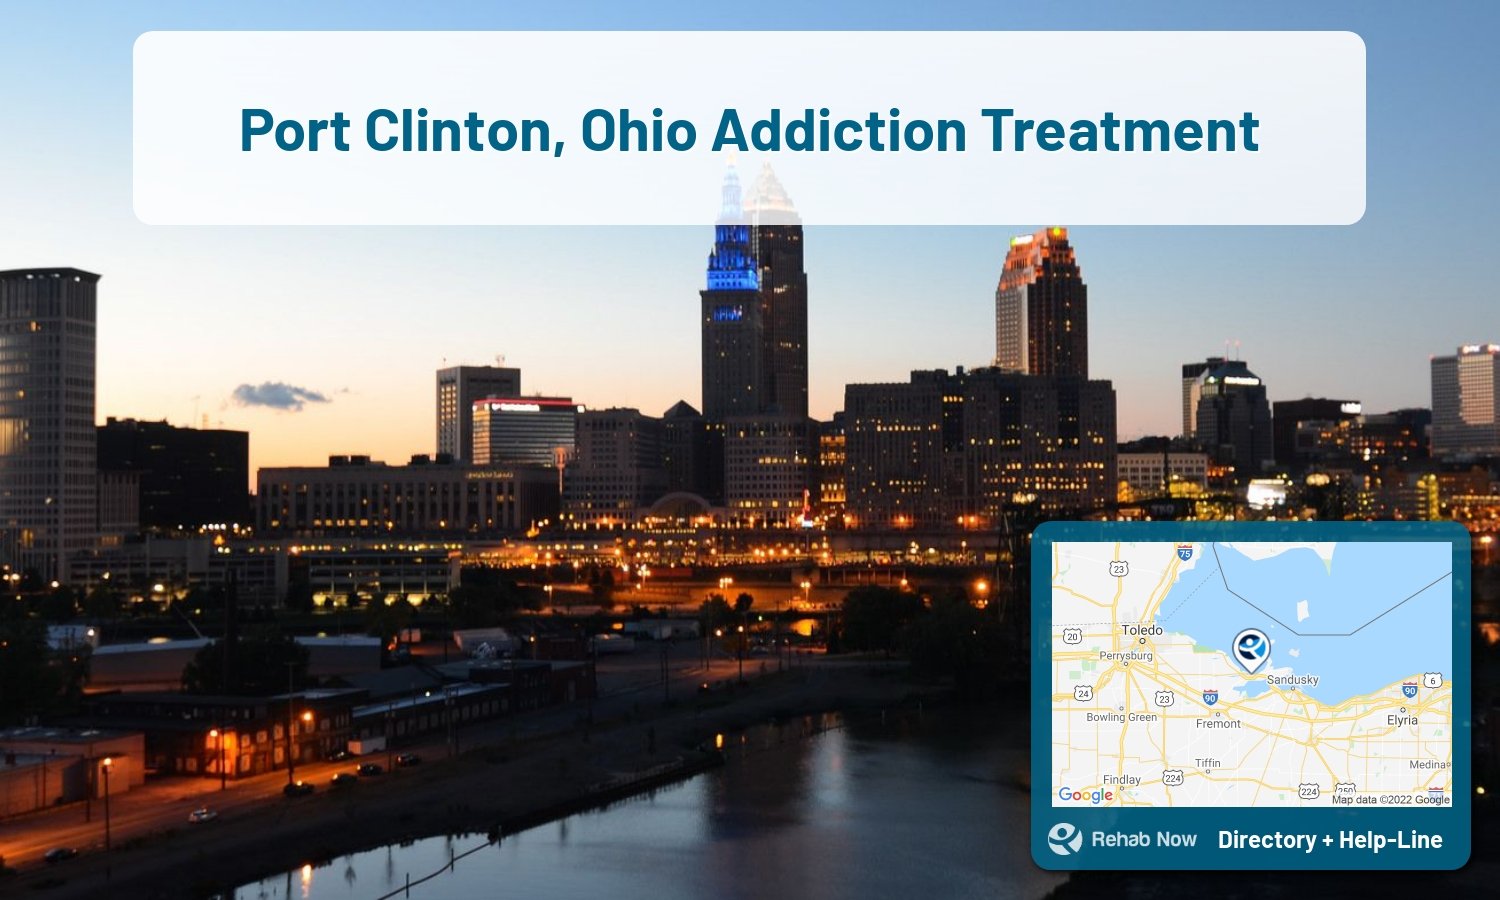 Drug rehab and alcohol treatment services nearby Port Clinton, OH. Need help choosing a treatment program? Call our free hotline!